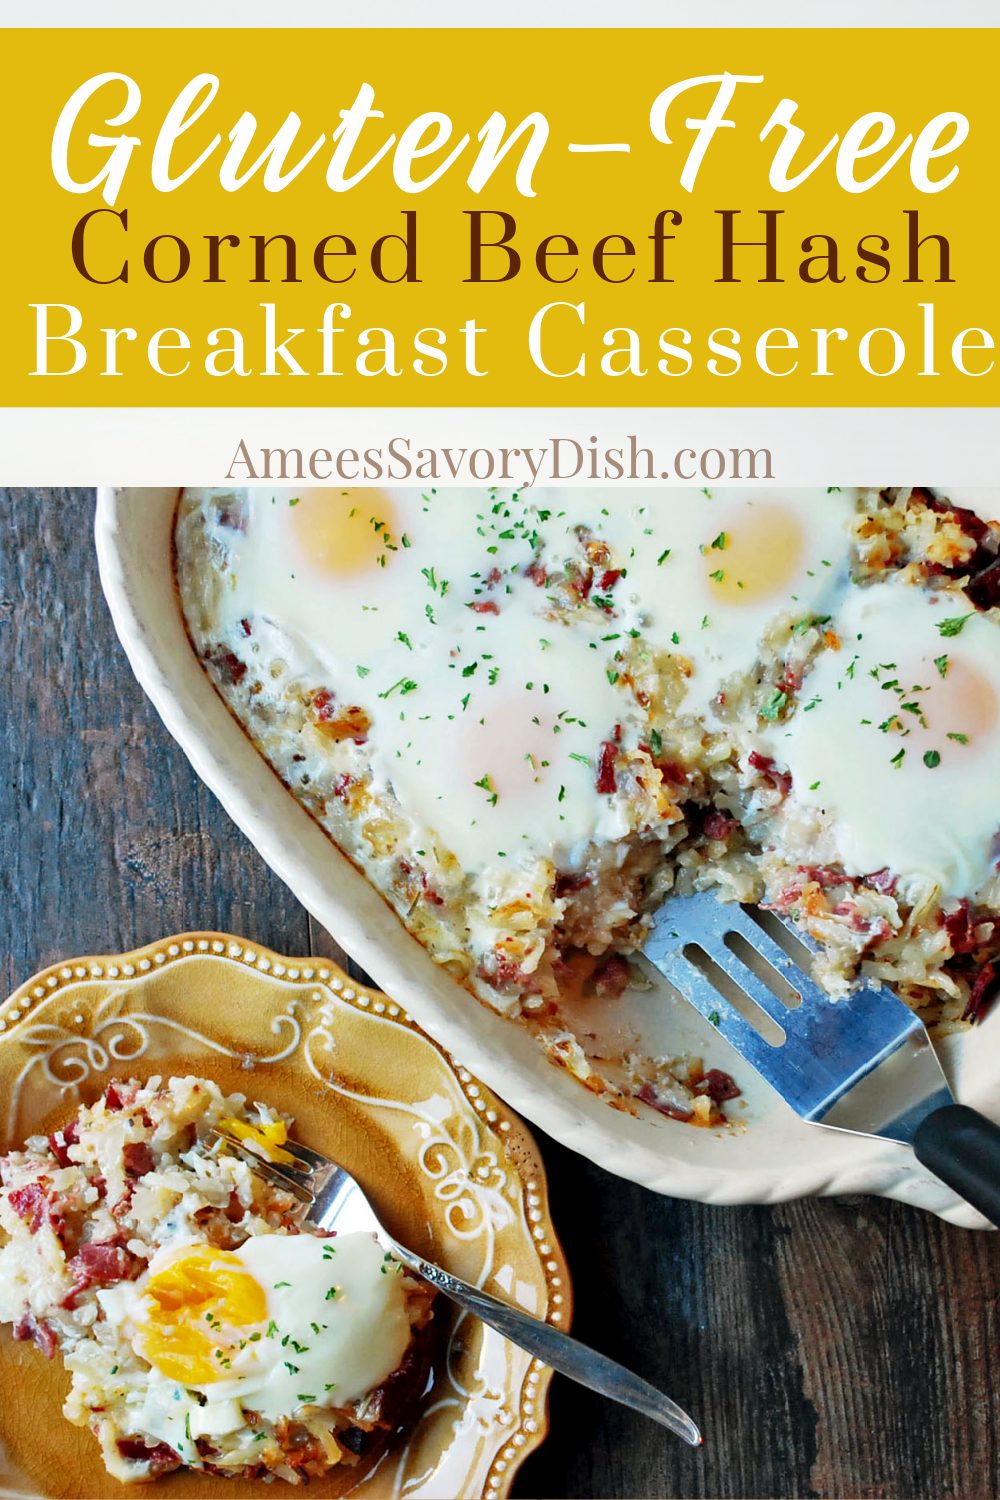 This lightened-up and delicious Corned Beef Hash Breakfast Casserole is a combination of cheese, hashbrown potatoes, corned beef, fresh herbs, and eggs. via @Ameessavorydish